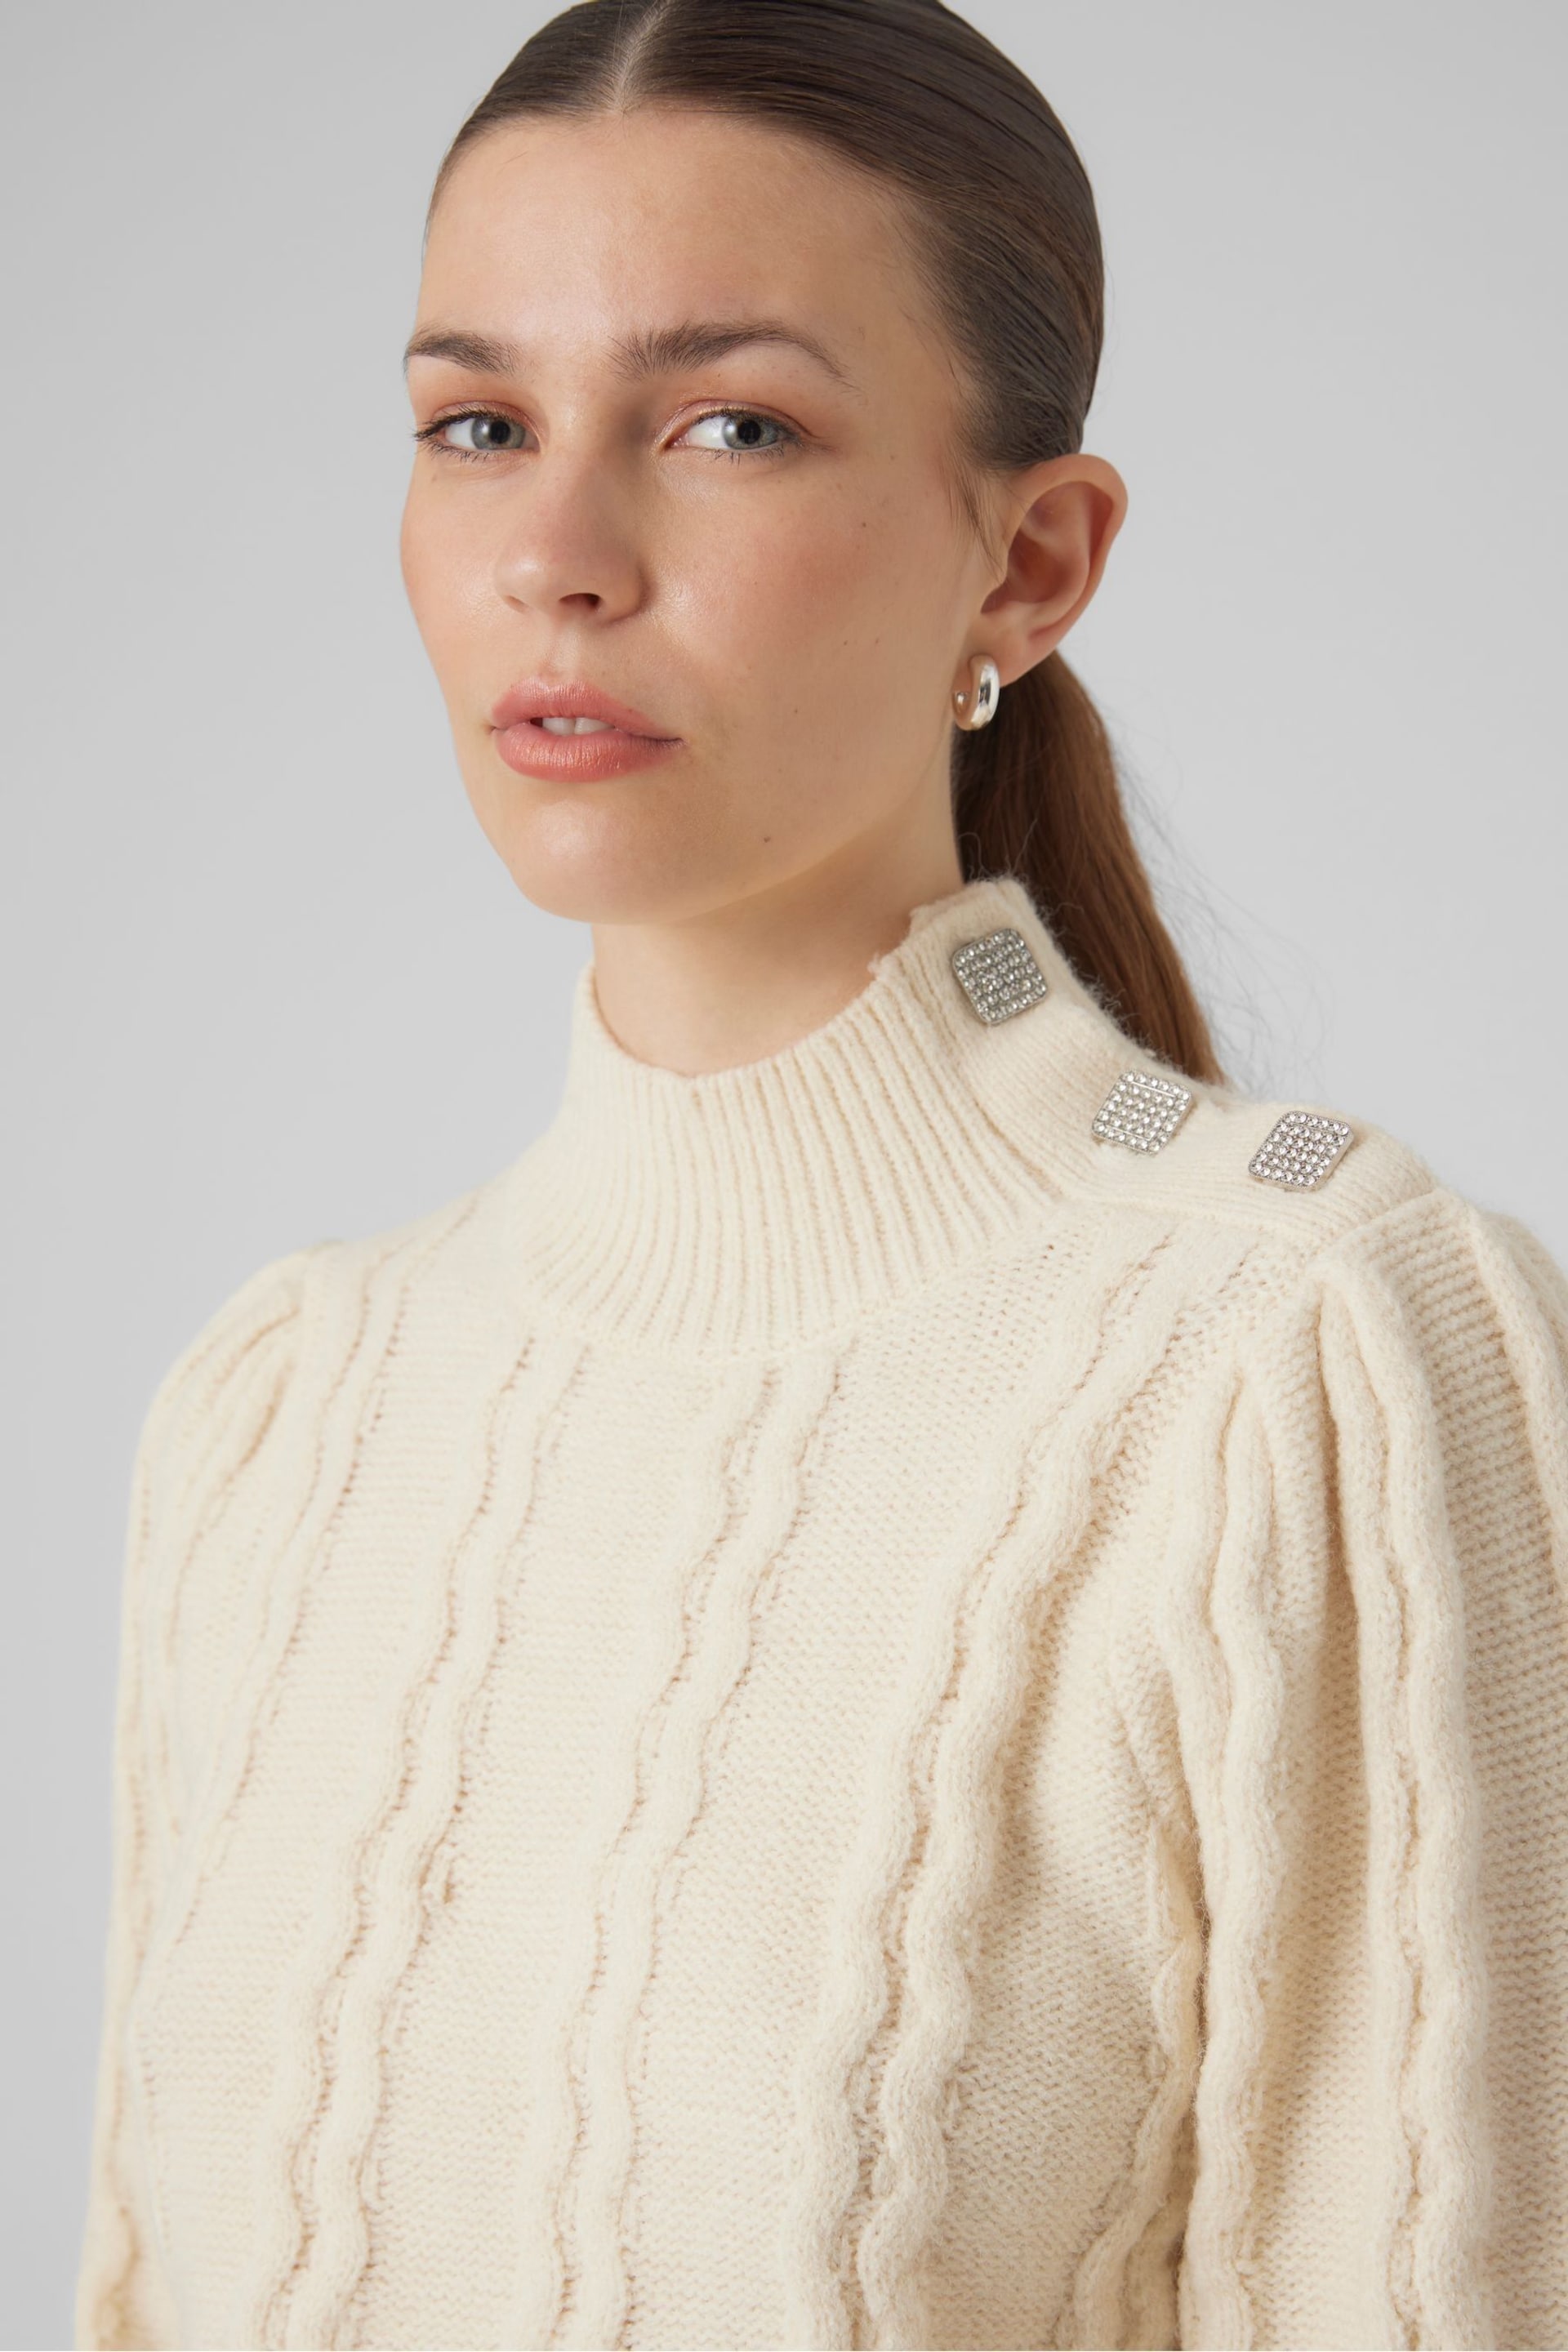 VERO MODA Cream High Neck Cable Knit Jumper with Diamante Buttons - Image 1 of 5